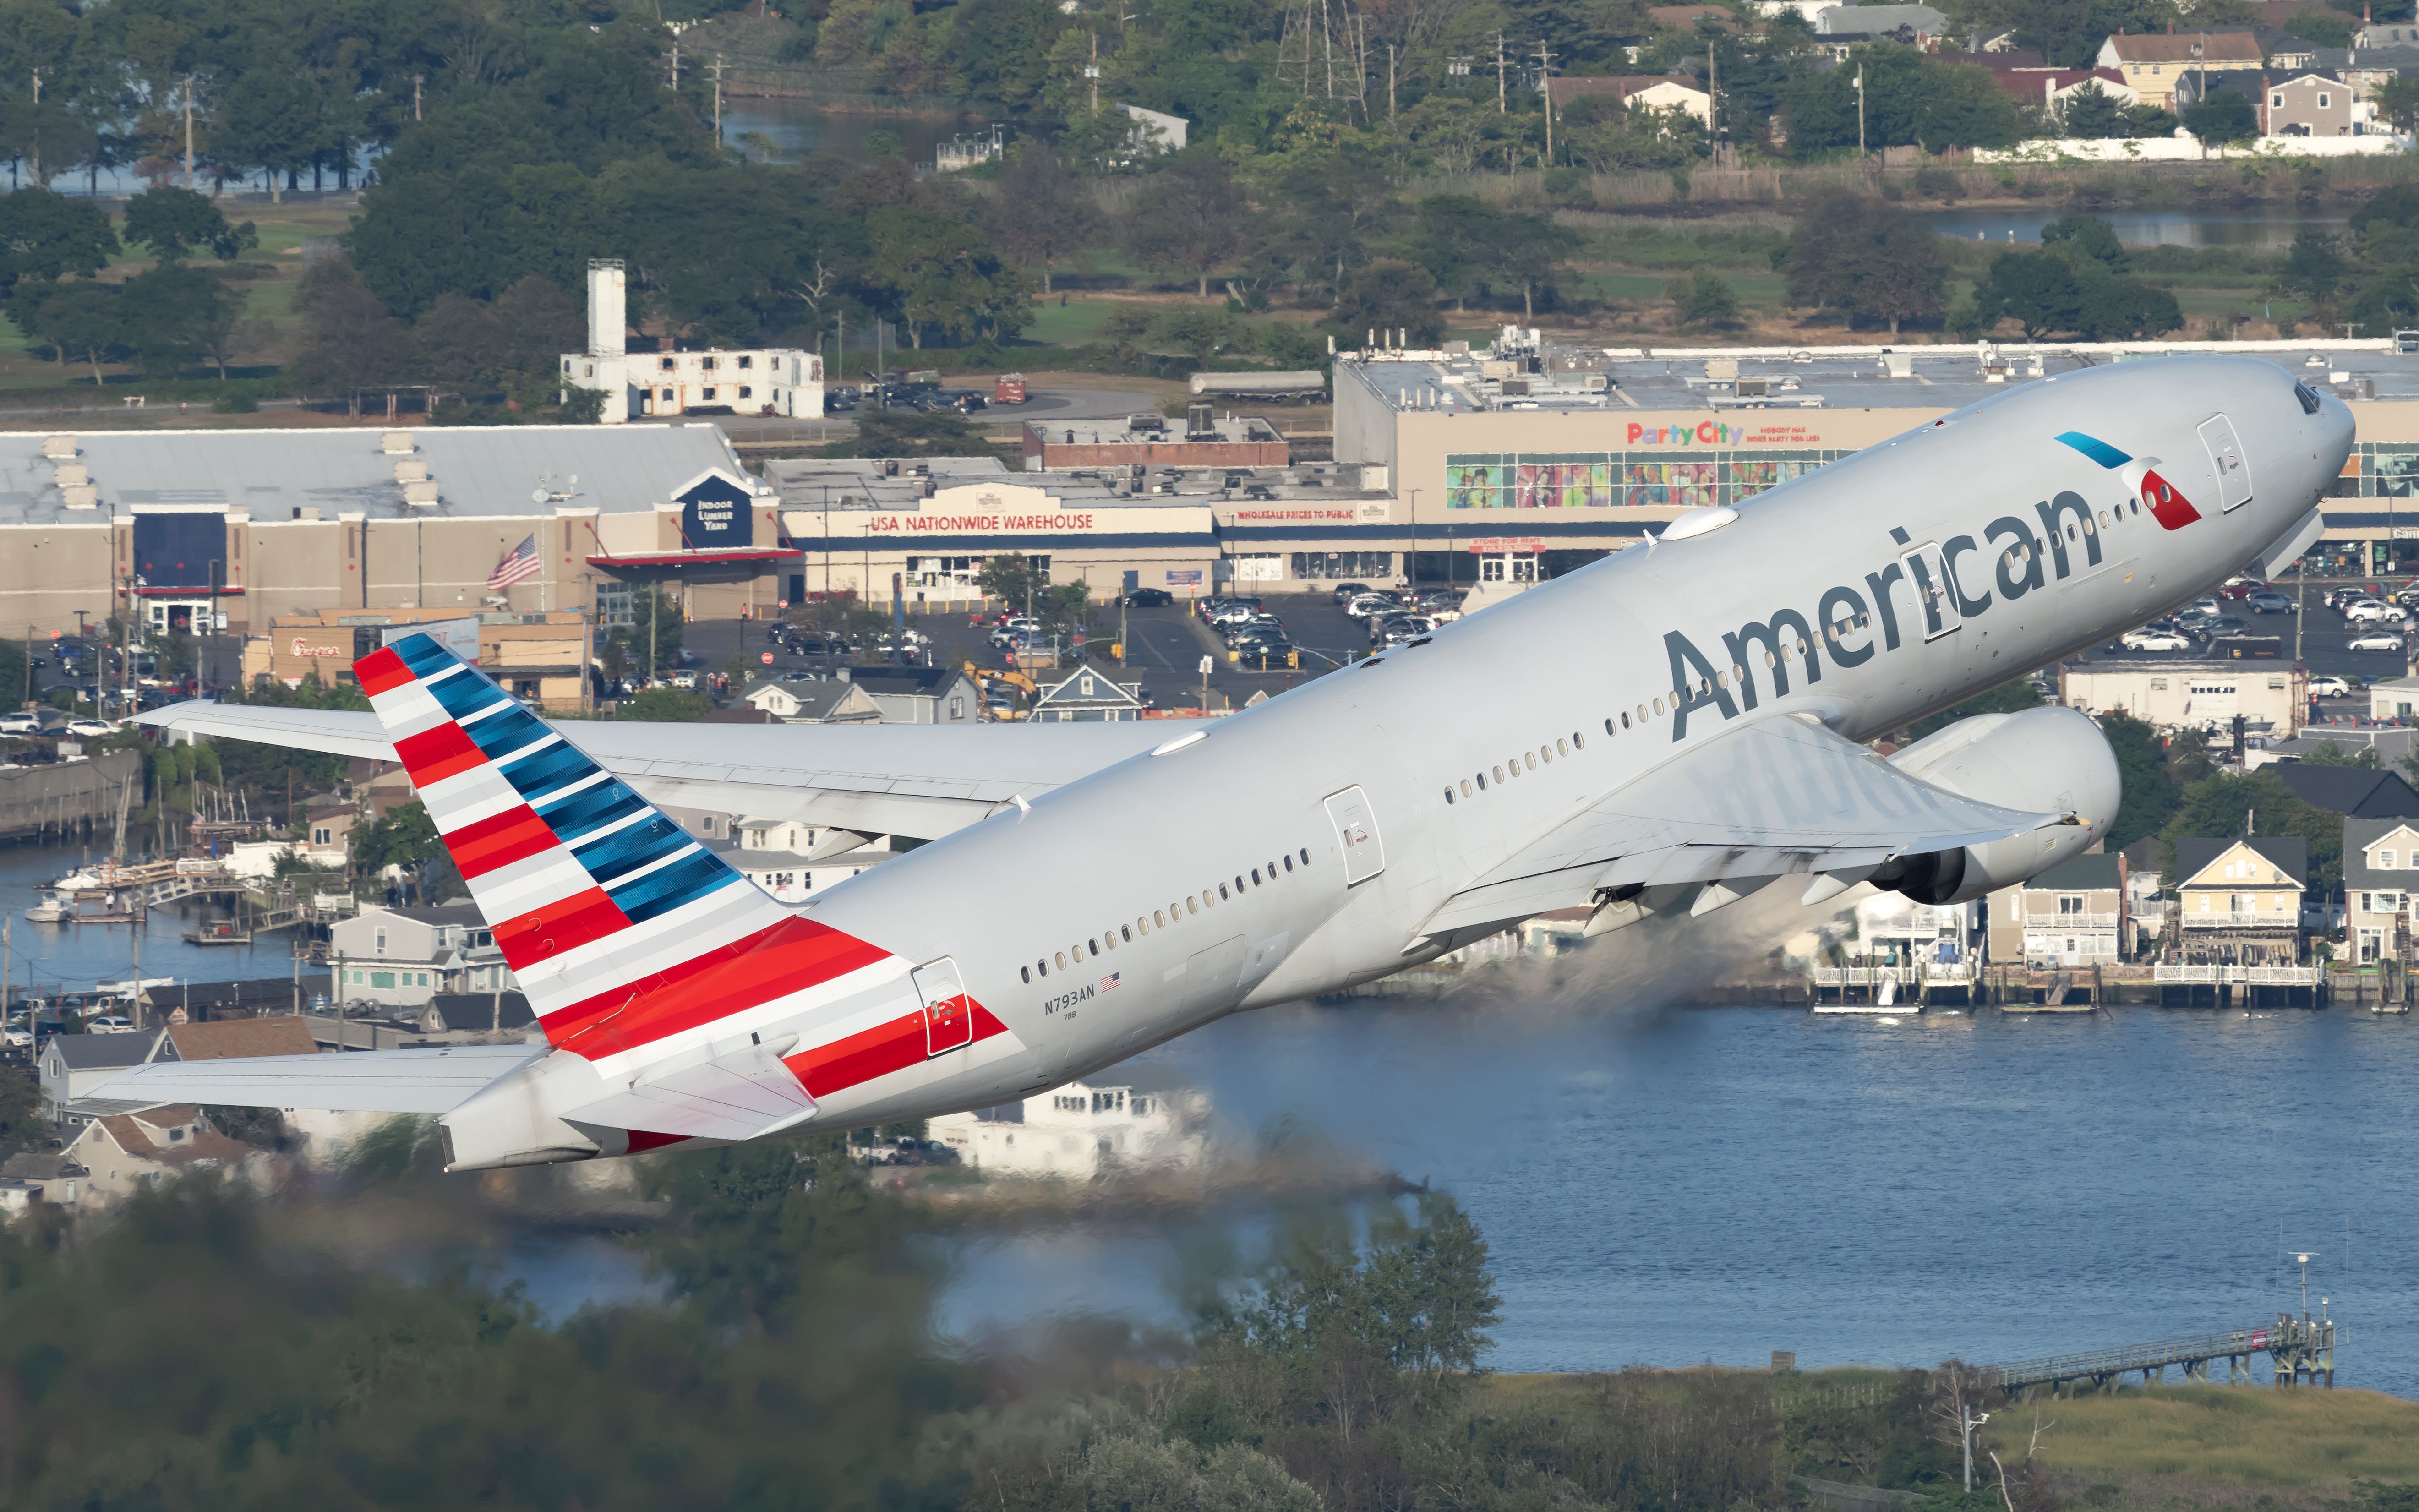 An American Airlines Boeing 777 taking off.